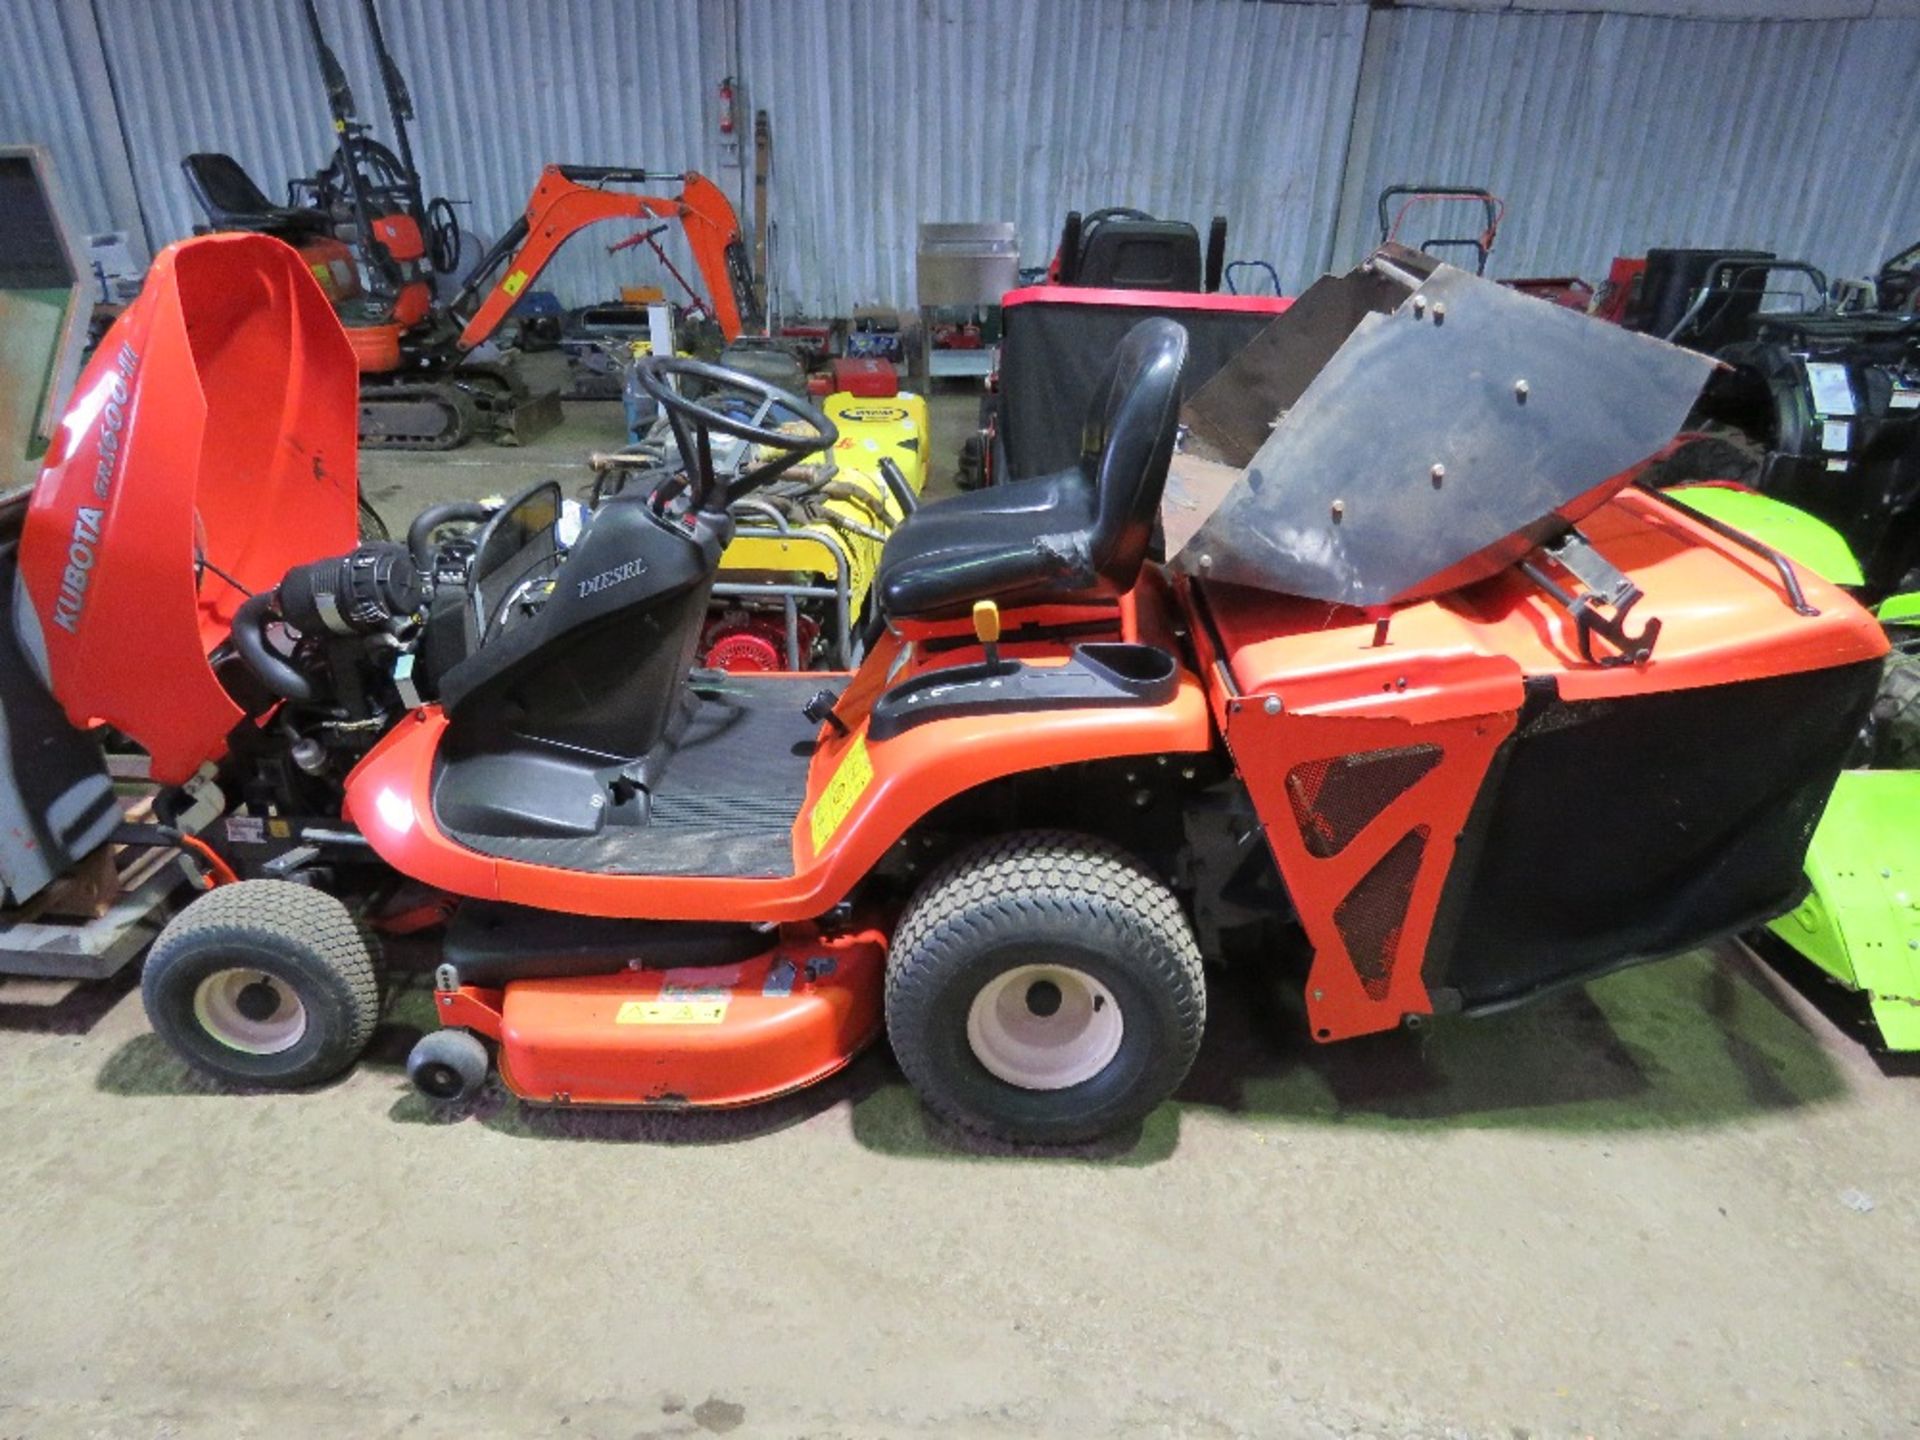 KUBOTA GR1600-II DIESEL RIDE ON MOWER WITH REAR COLLECTOR PLUS DISCHARGE CHUTE. SN:30142. WHEN TESTE - Image 14 of 14